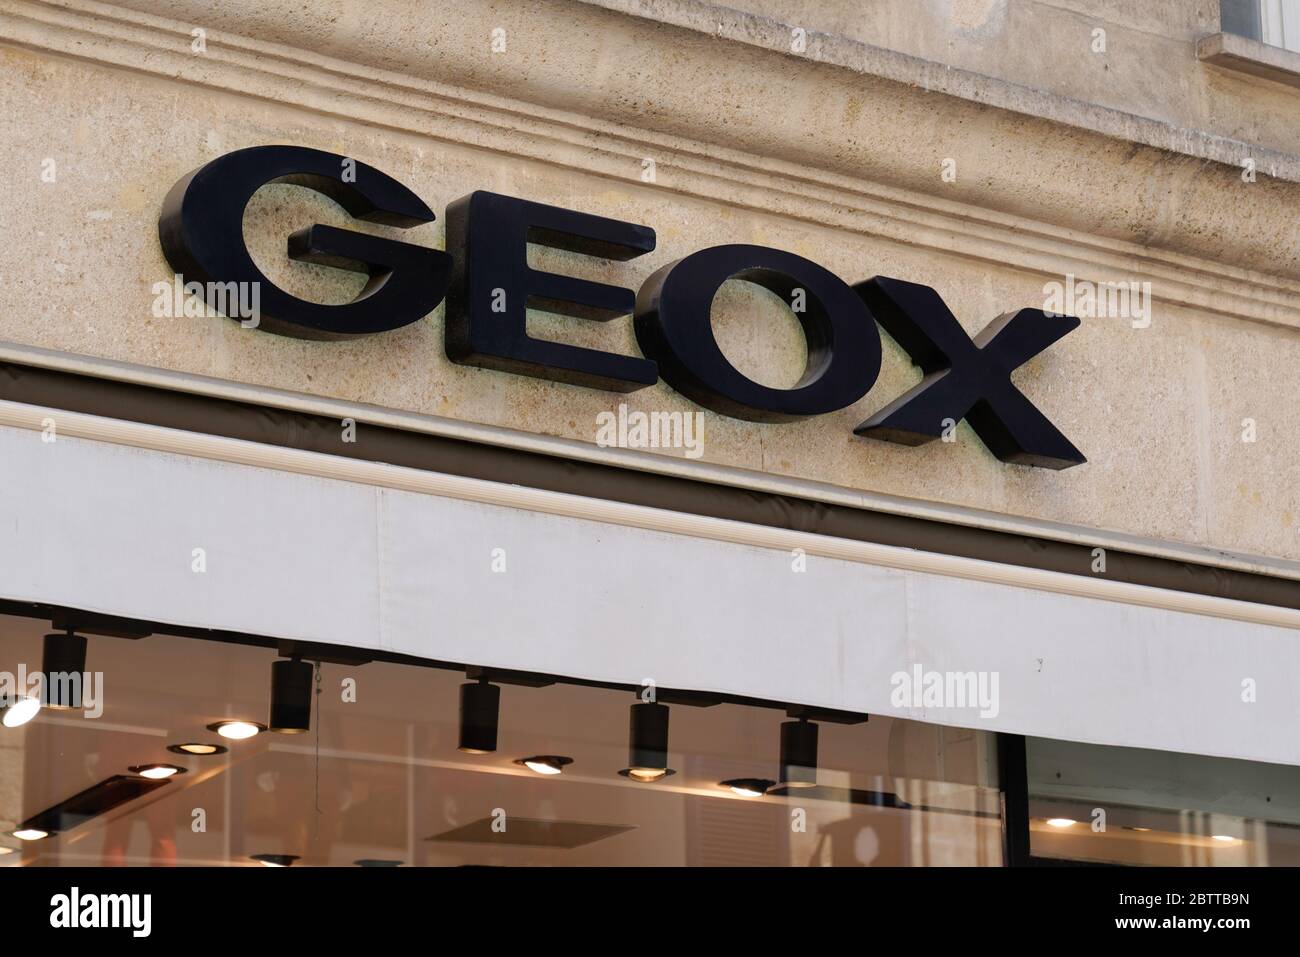 Bordeaux , Aquitaine / France - 05 05 2020 : geox shop sign and logo on the  store Stock Photo - Alamy